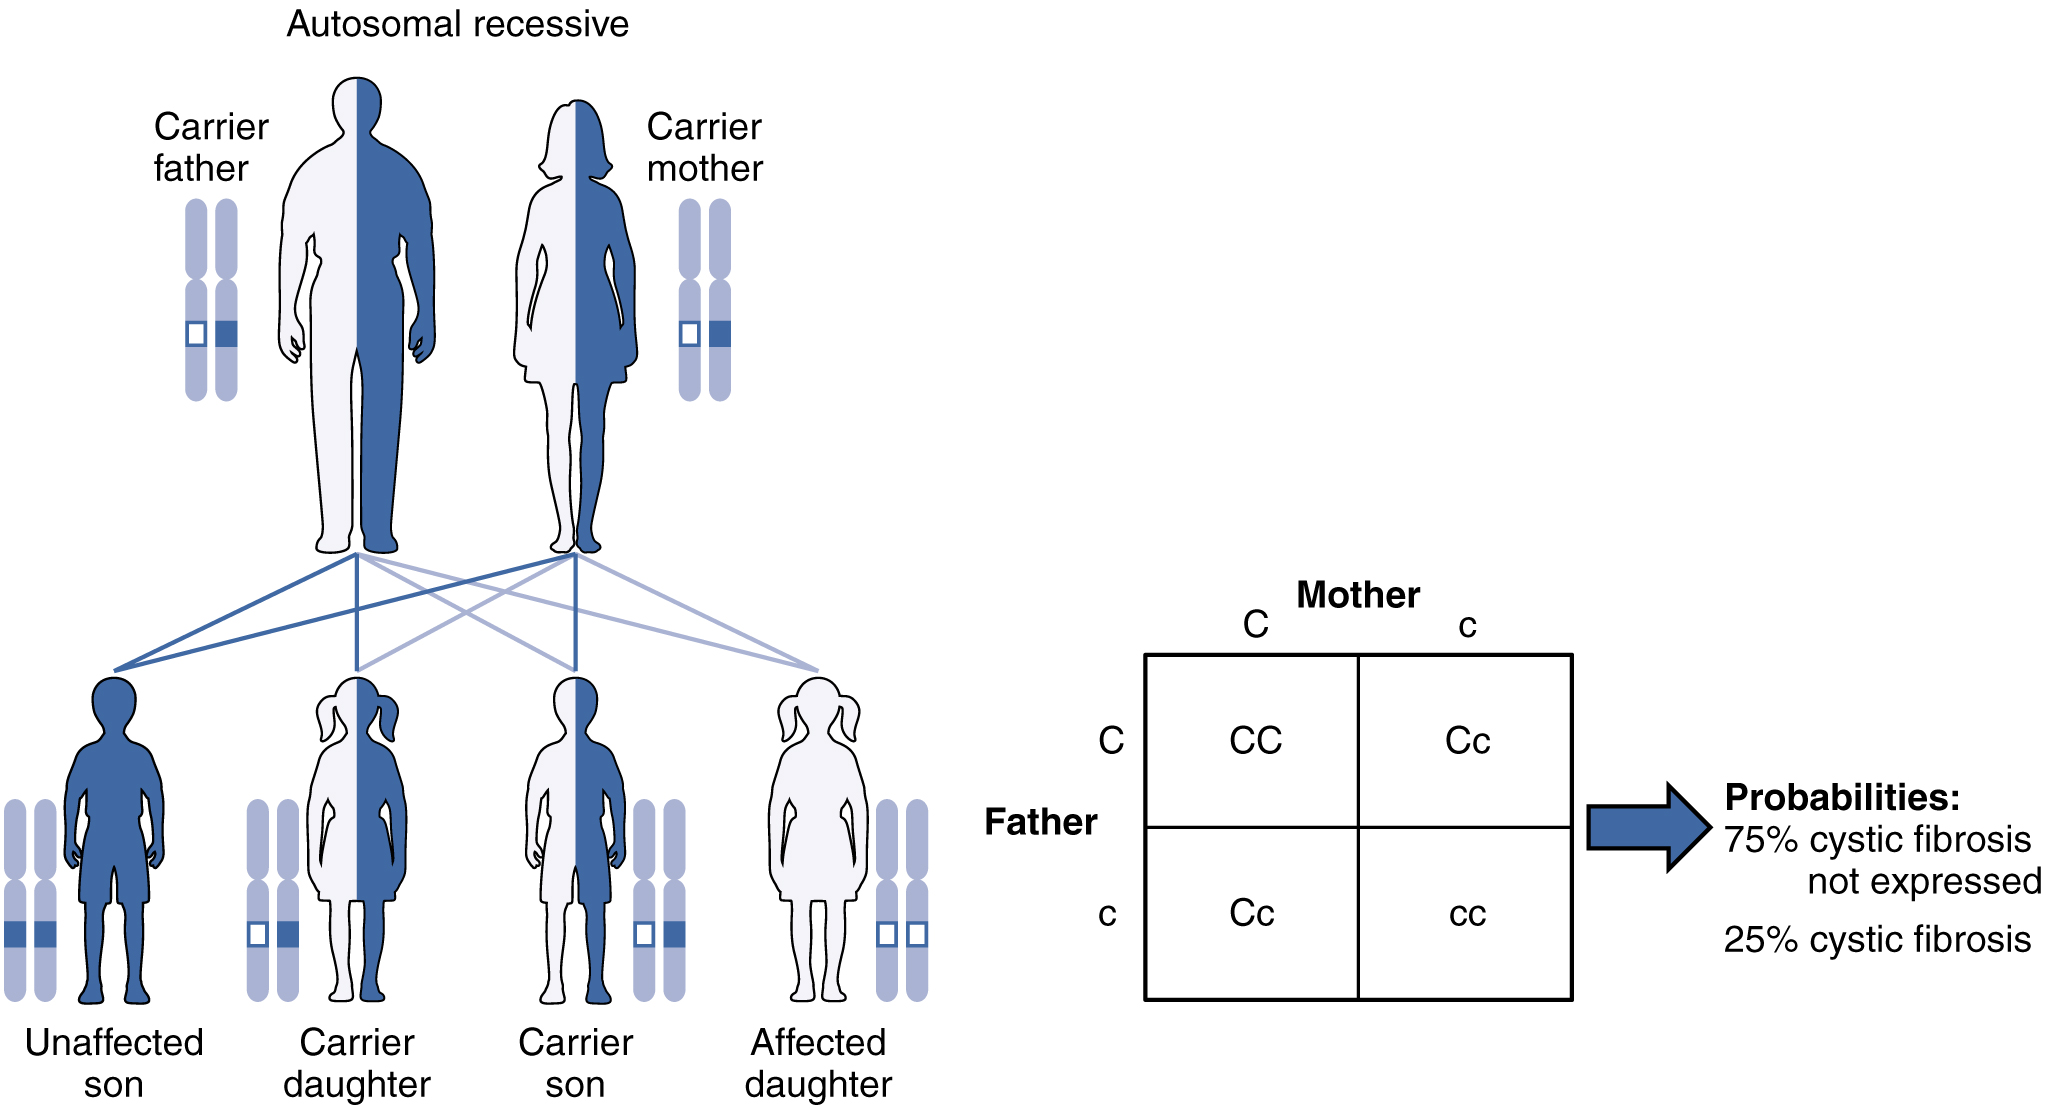 In this figure, the offspring of a carrier father and carrier mother are shown. The first generation has one unaffected son, one affected daughter and one carrier son and one carrier daughter. The second generation cross shows seventy five percent unaffected and twenty five percent affected with cystic fibrosis.